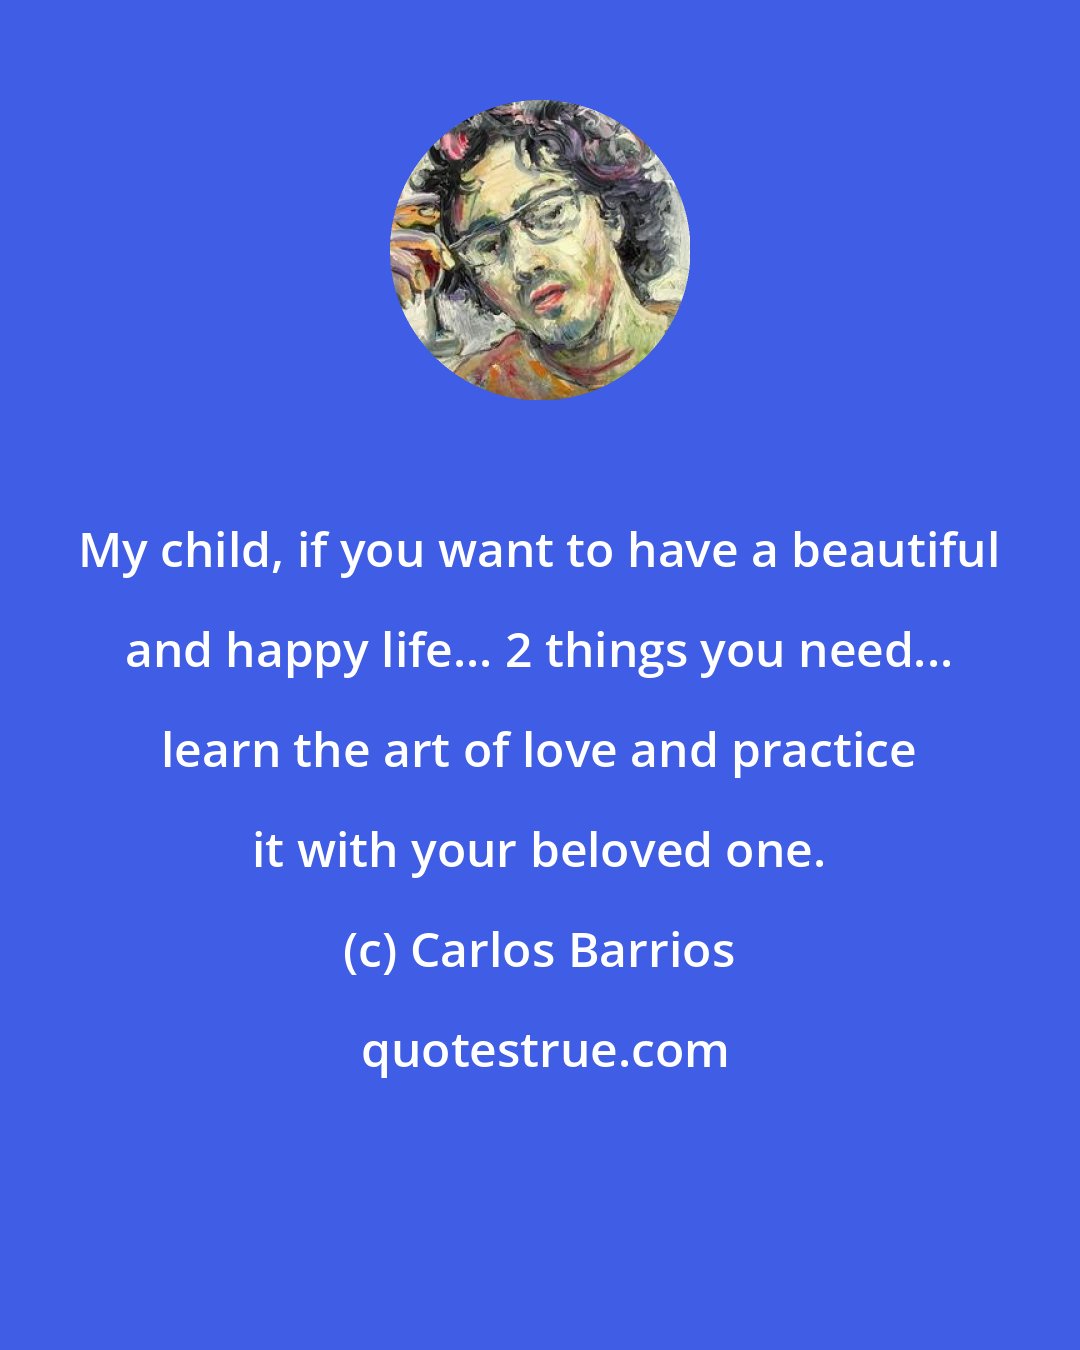 Carlos Barrios: My child, if you want to have a beautiful and happy life... 2 things you need... learn the art of love and practice it with your beloved one.